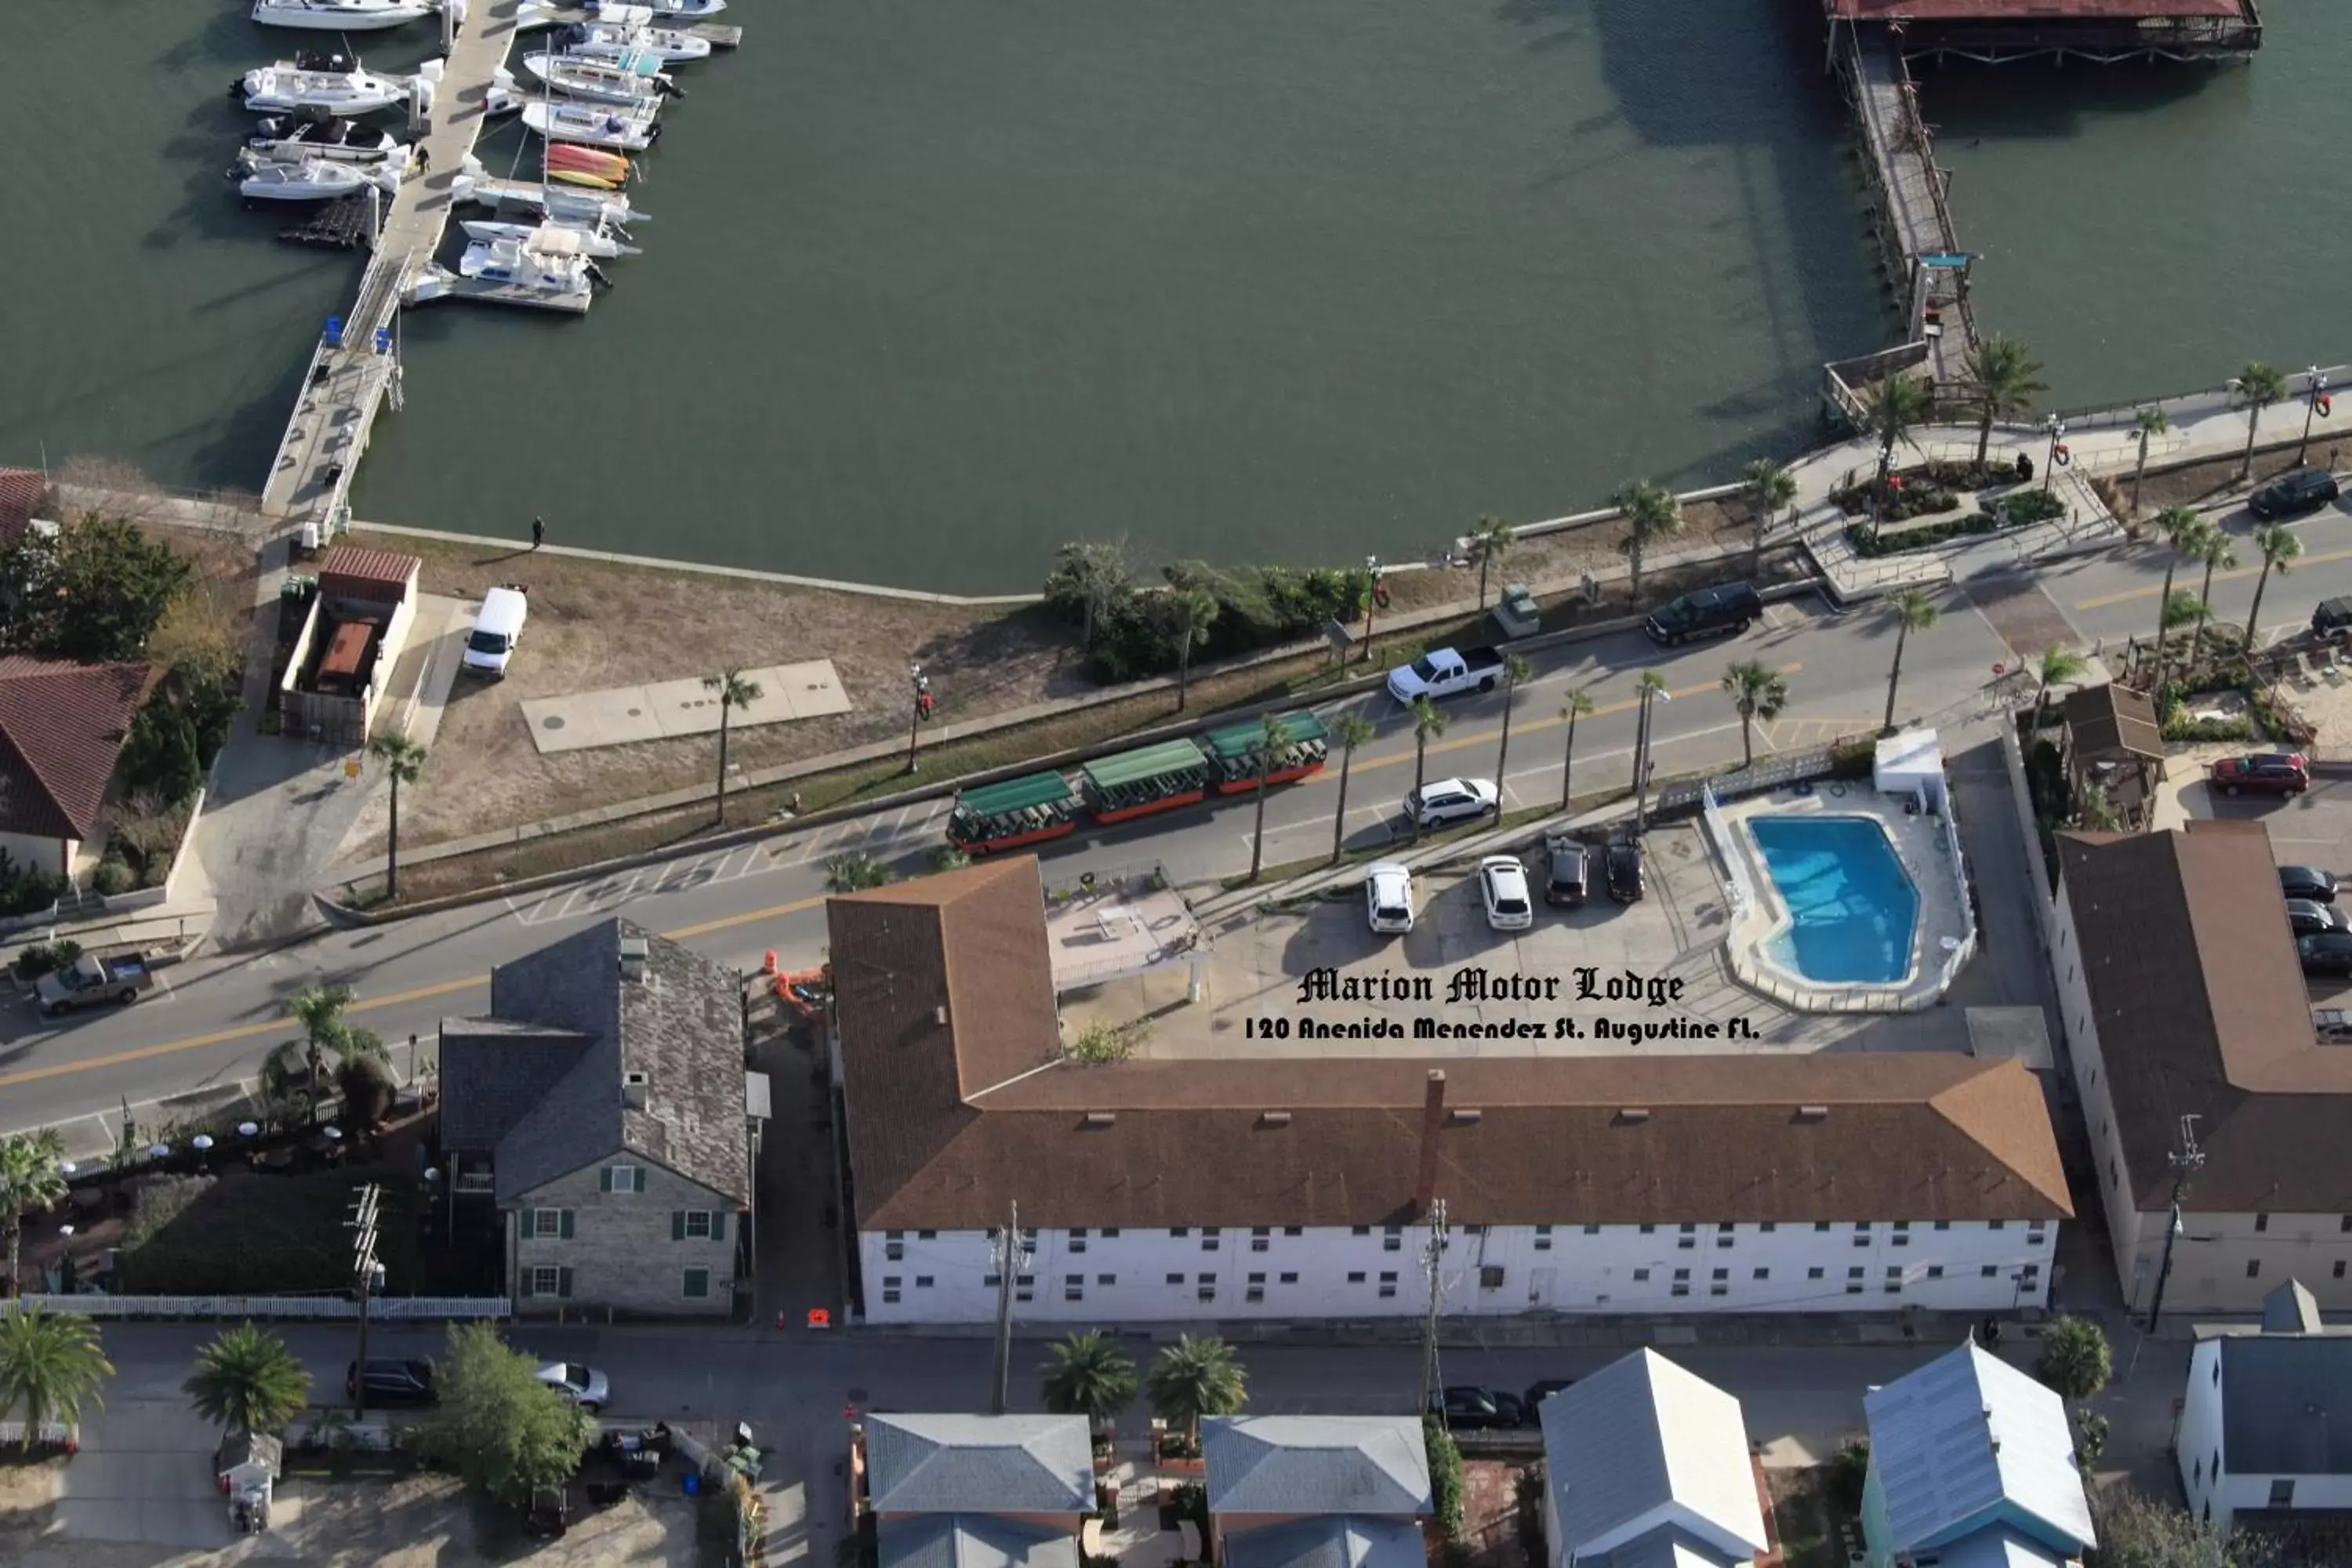 Bird's eye view in Historic Waterfront Marion Motor Lodge in downtown St Augustine